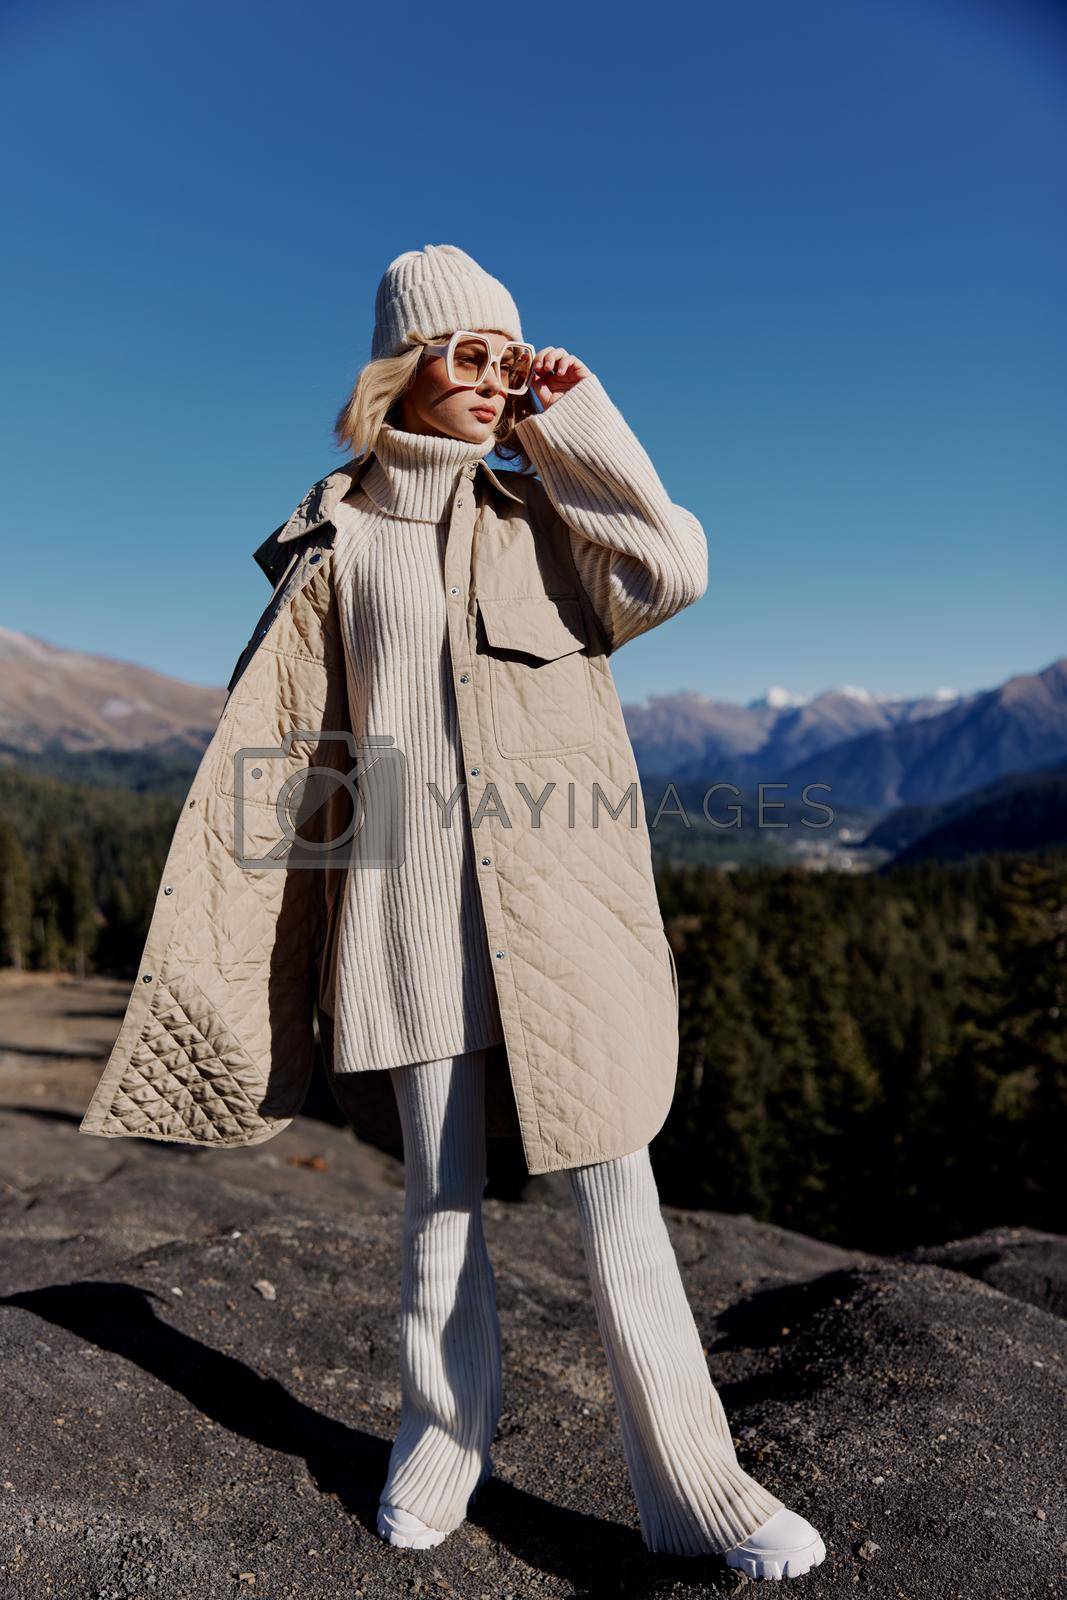 woman fashion glasses mountain top nature freedom relaxation. High quality photo